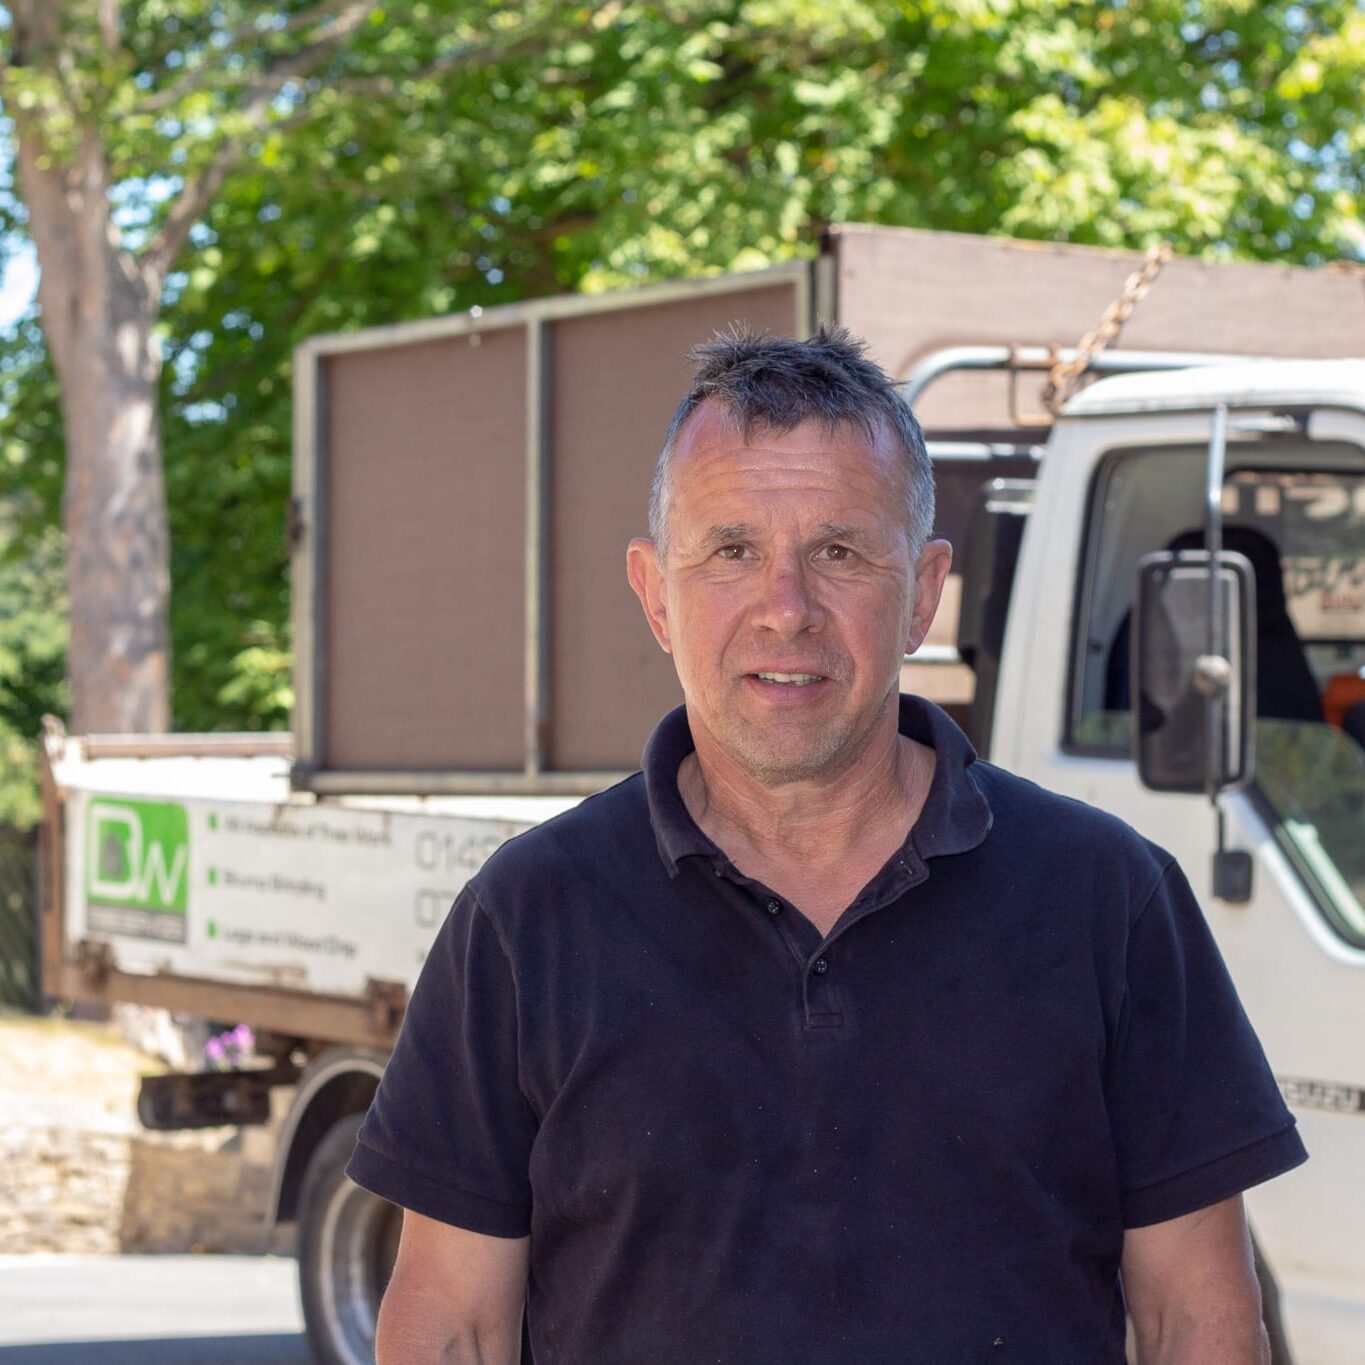 Photo of David owner and tree surgeon at D W Tree Services